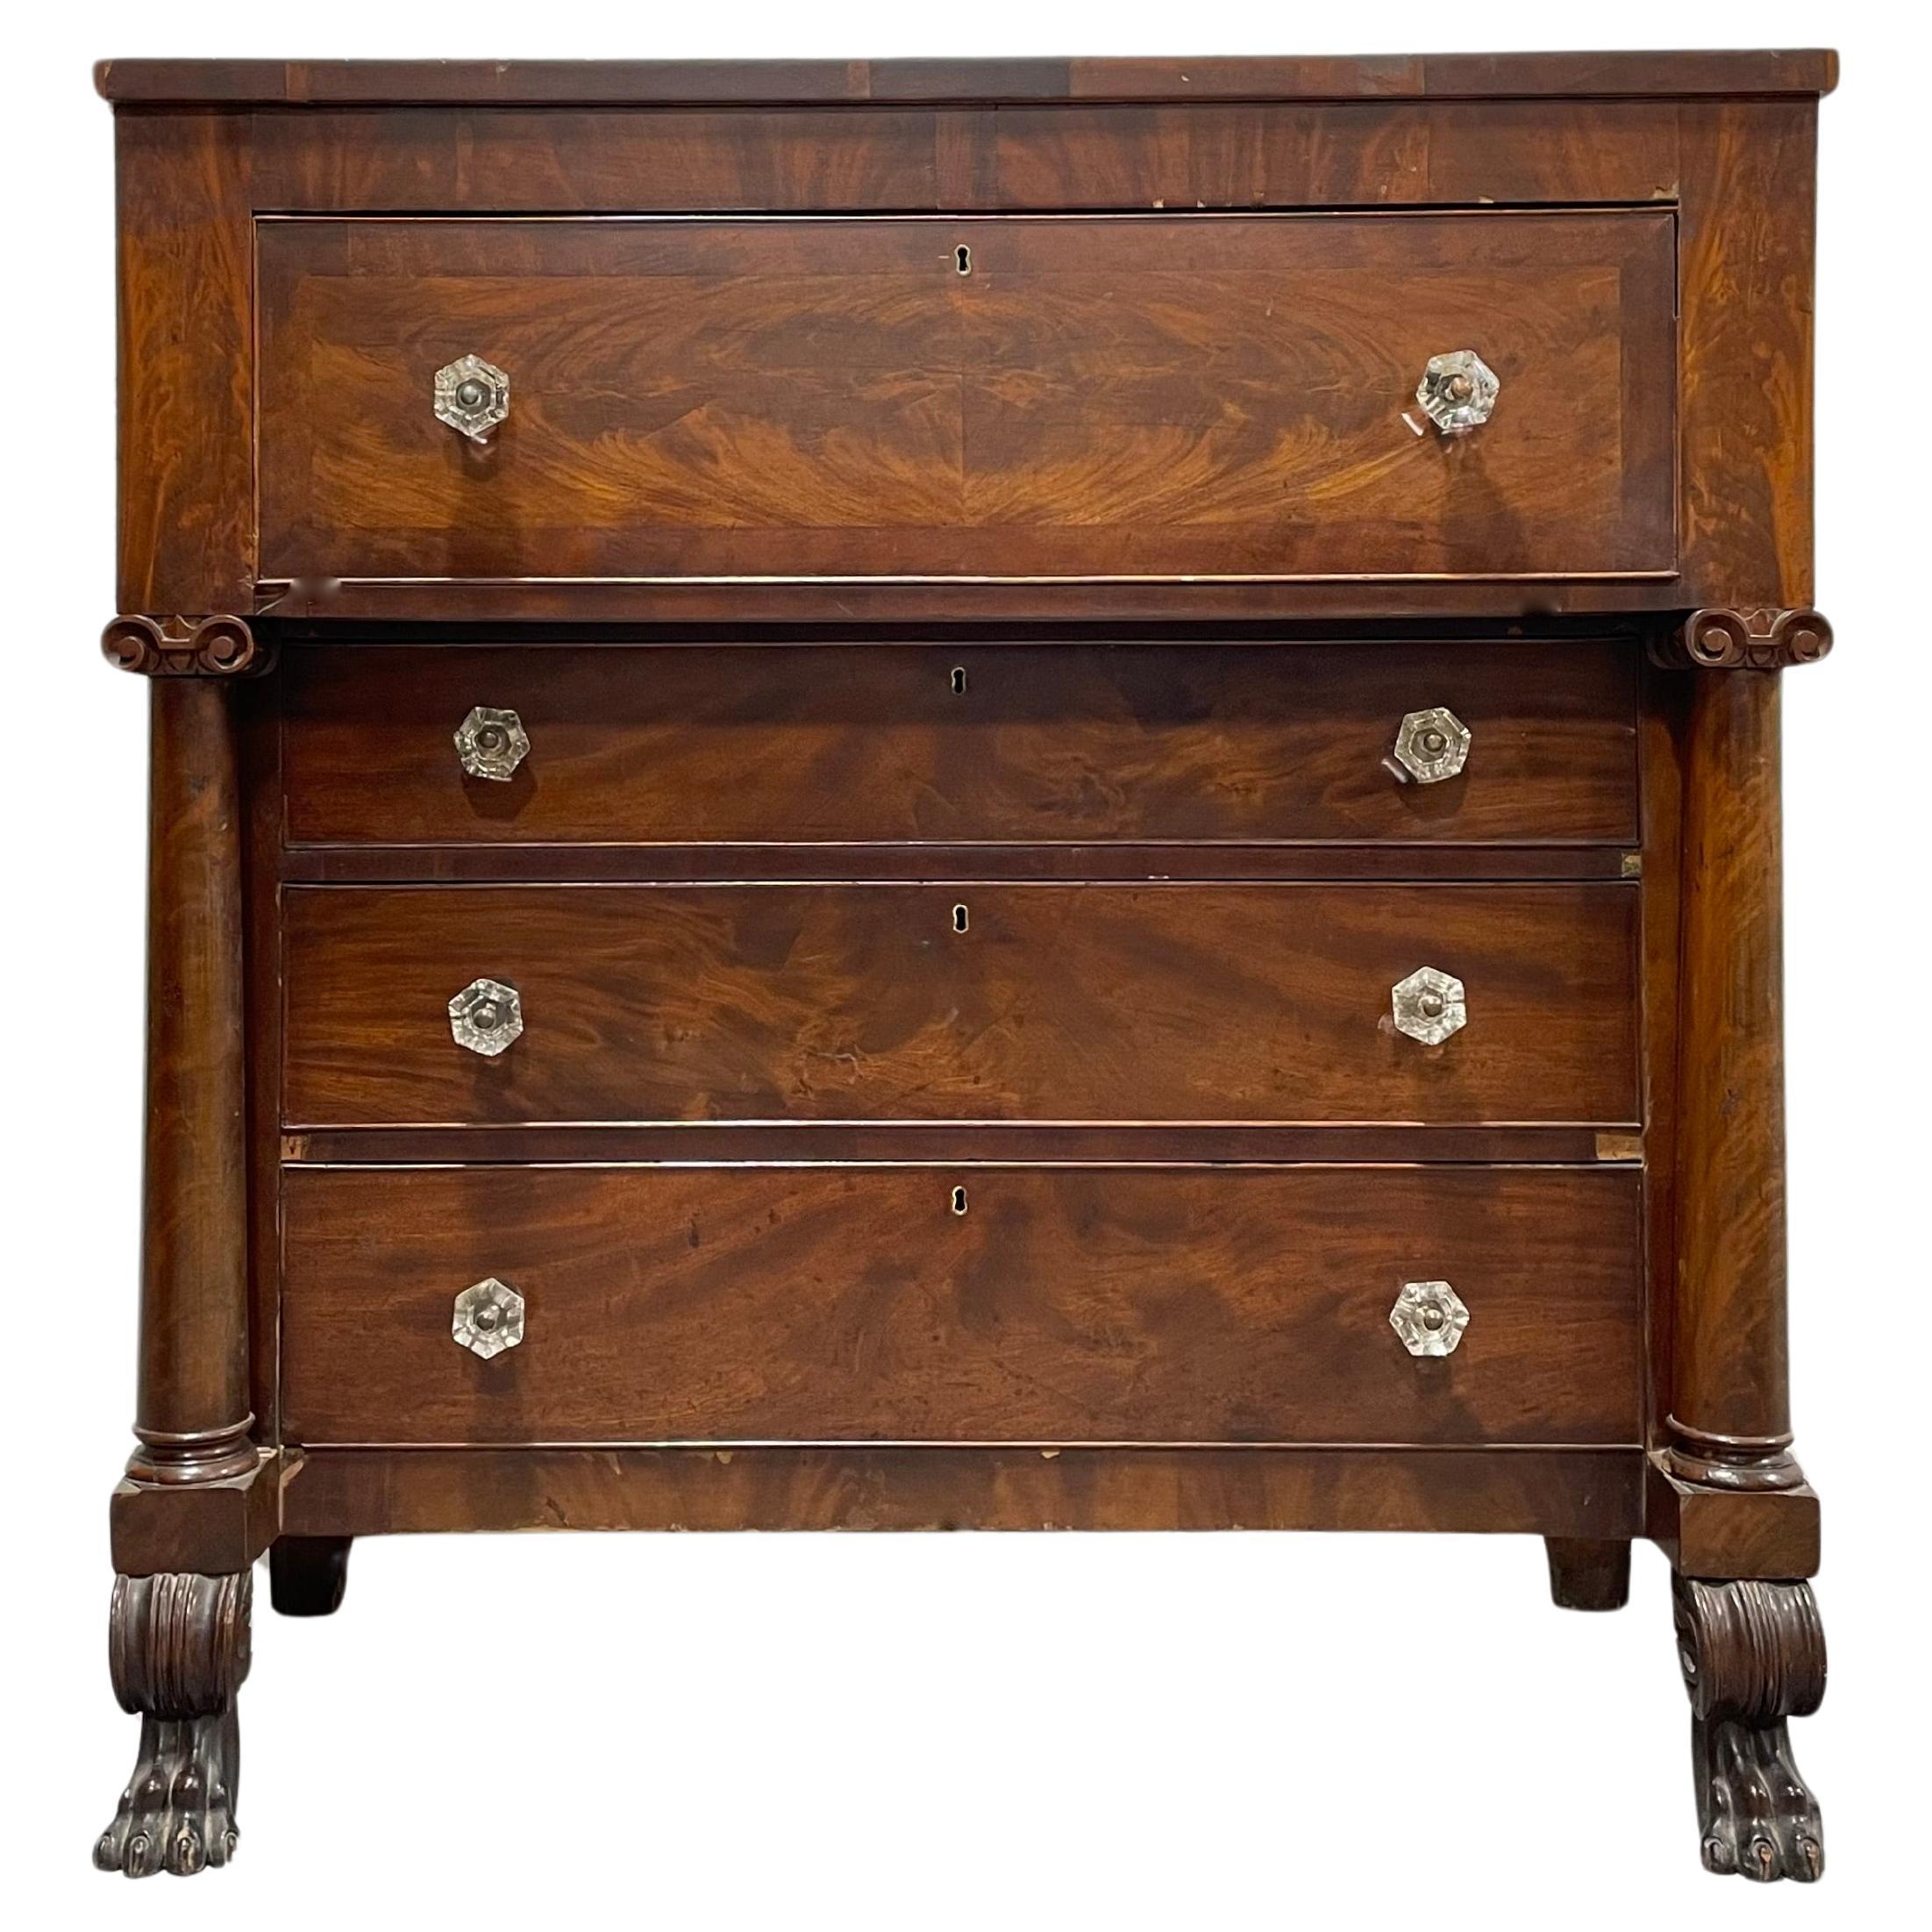 Antique Empire Period Mahogany Chest of Drawers, c. 1850’s For Sale